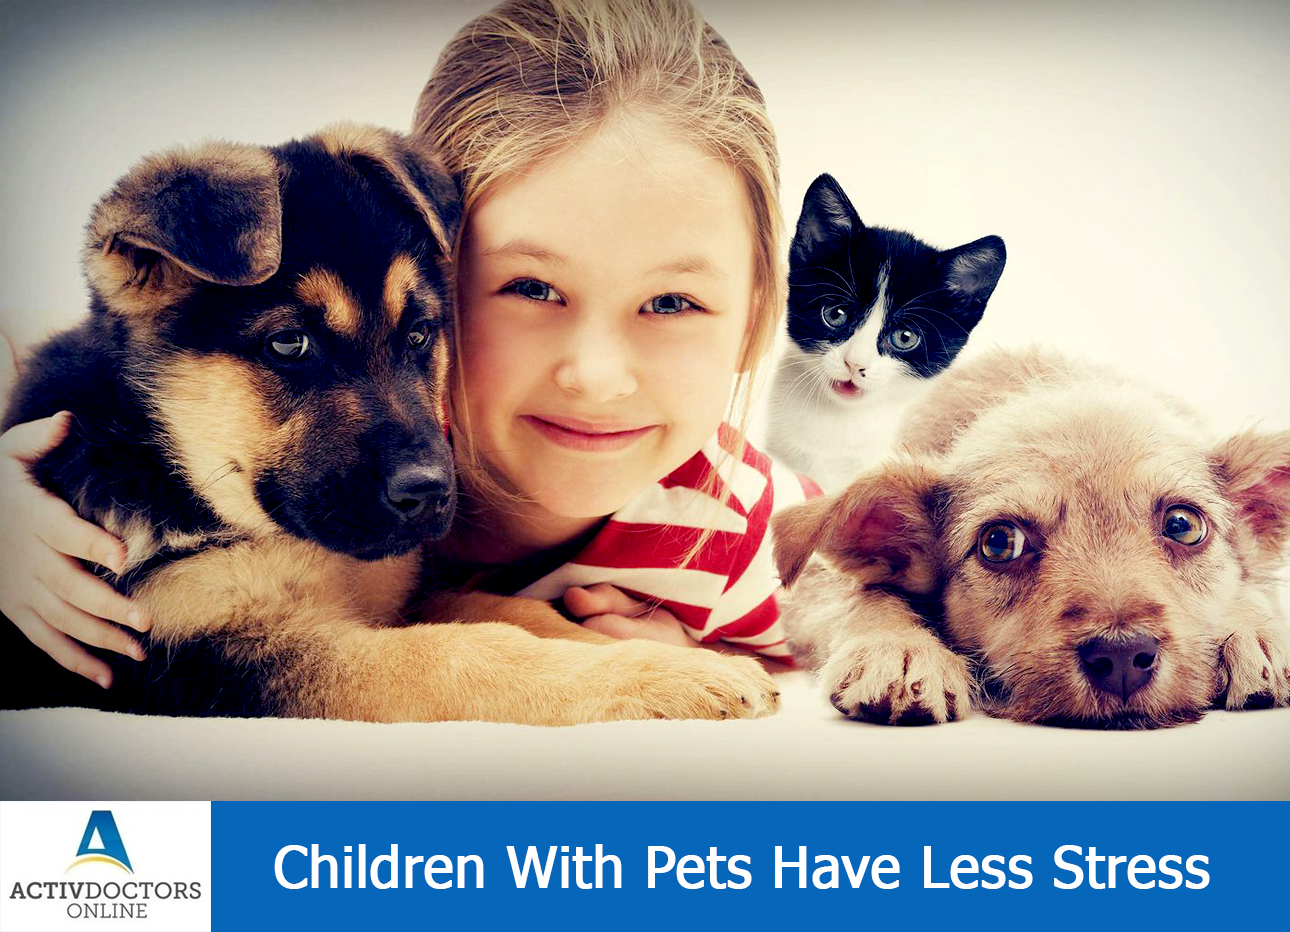 Children With Pets Have Less Stress